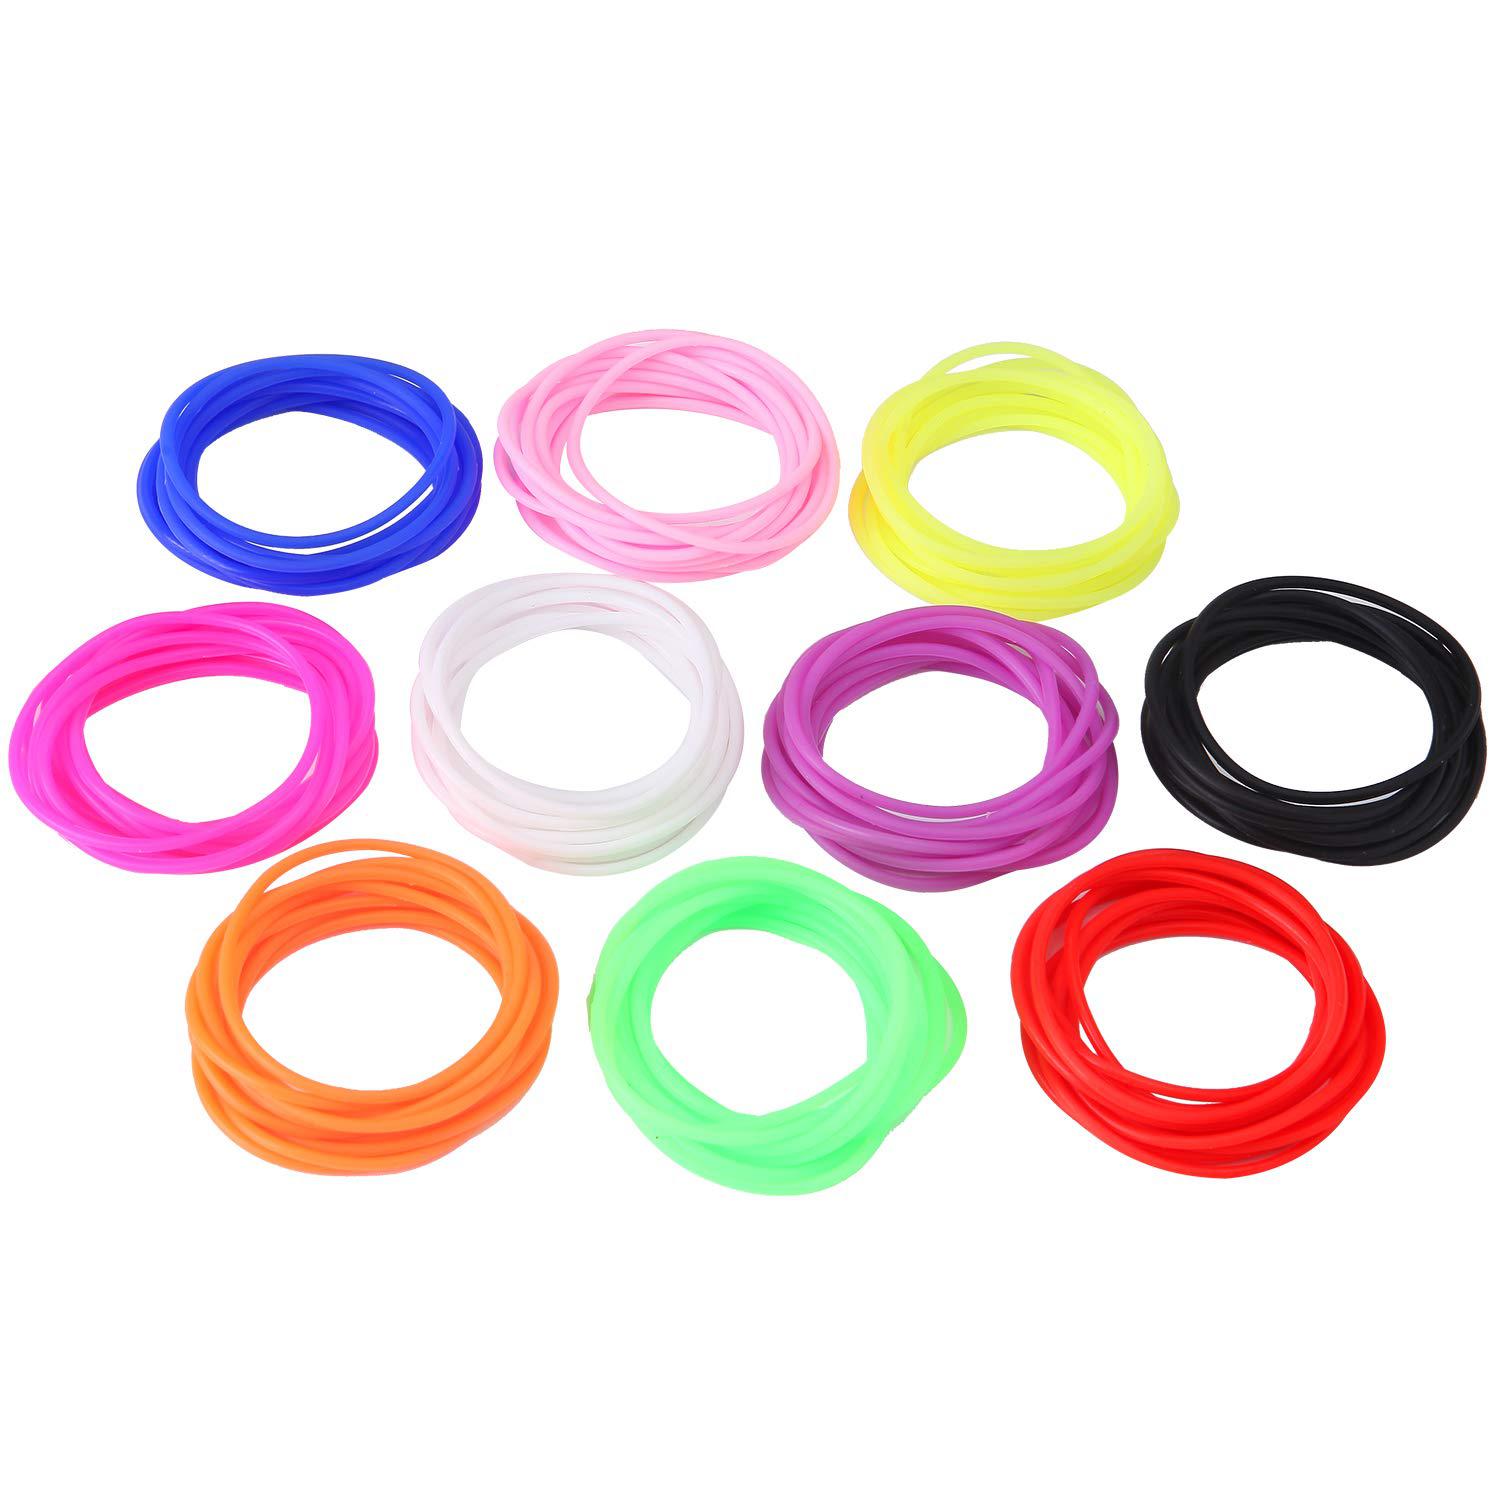 senkary 120 pieces colorful silicone jelly bracelets nonluminous 80s bracelets bands for party, adults, women, girls (10 colo